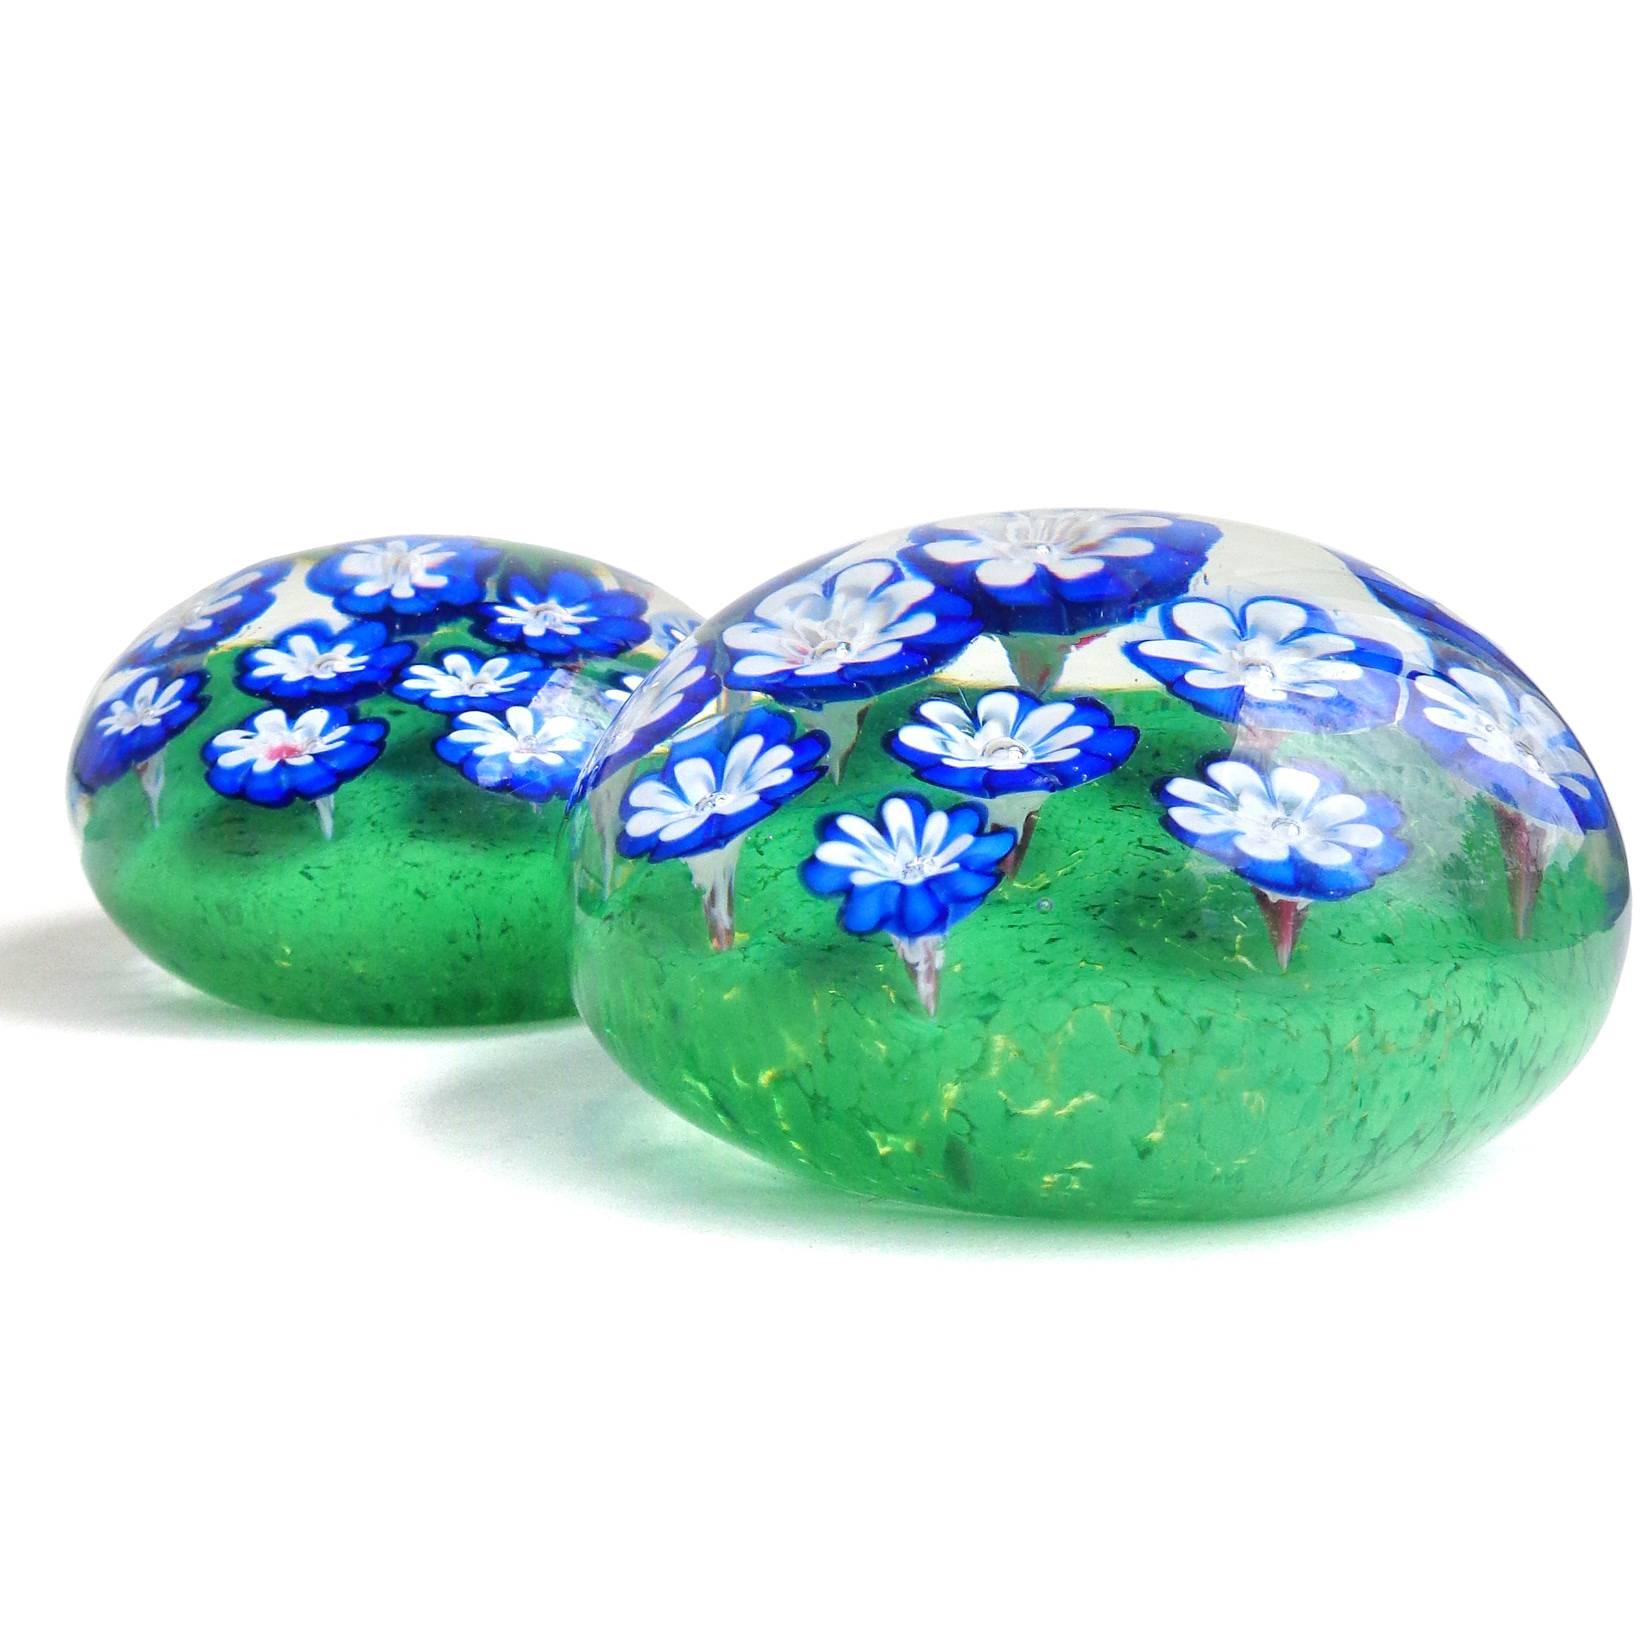 Gorgeous set of Murano hand blown blue and white millefiori Italian art glass flower garden paperweights. Attributed to designer Galliano Ferro. The flowers grow out of a bed of green, just beautiful! Large paperweight measures 3 1/2" across -